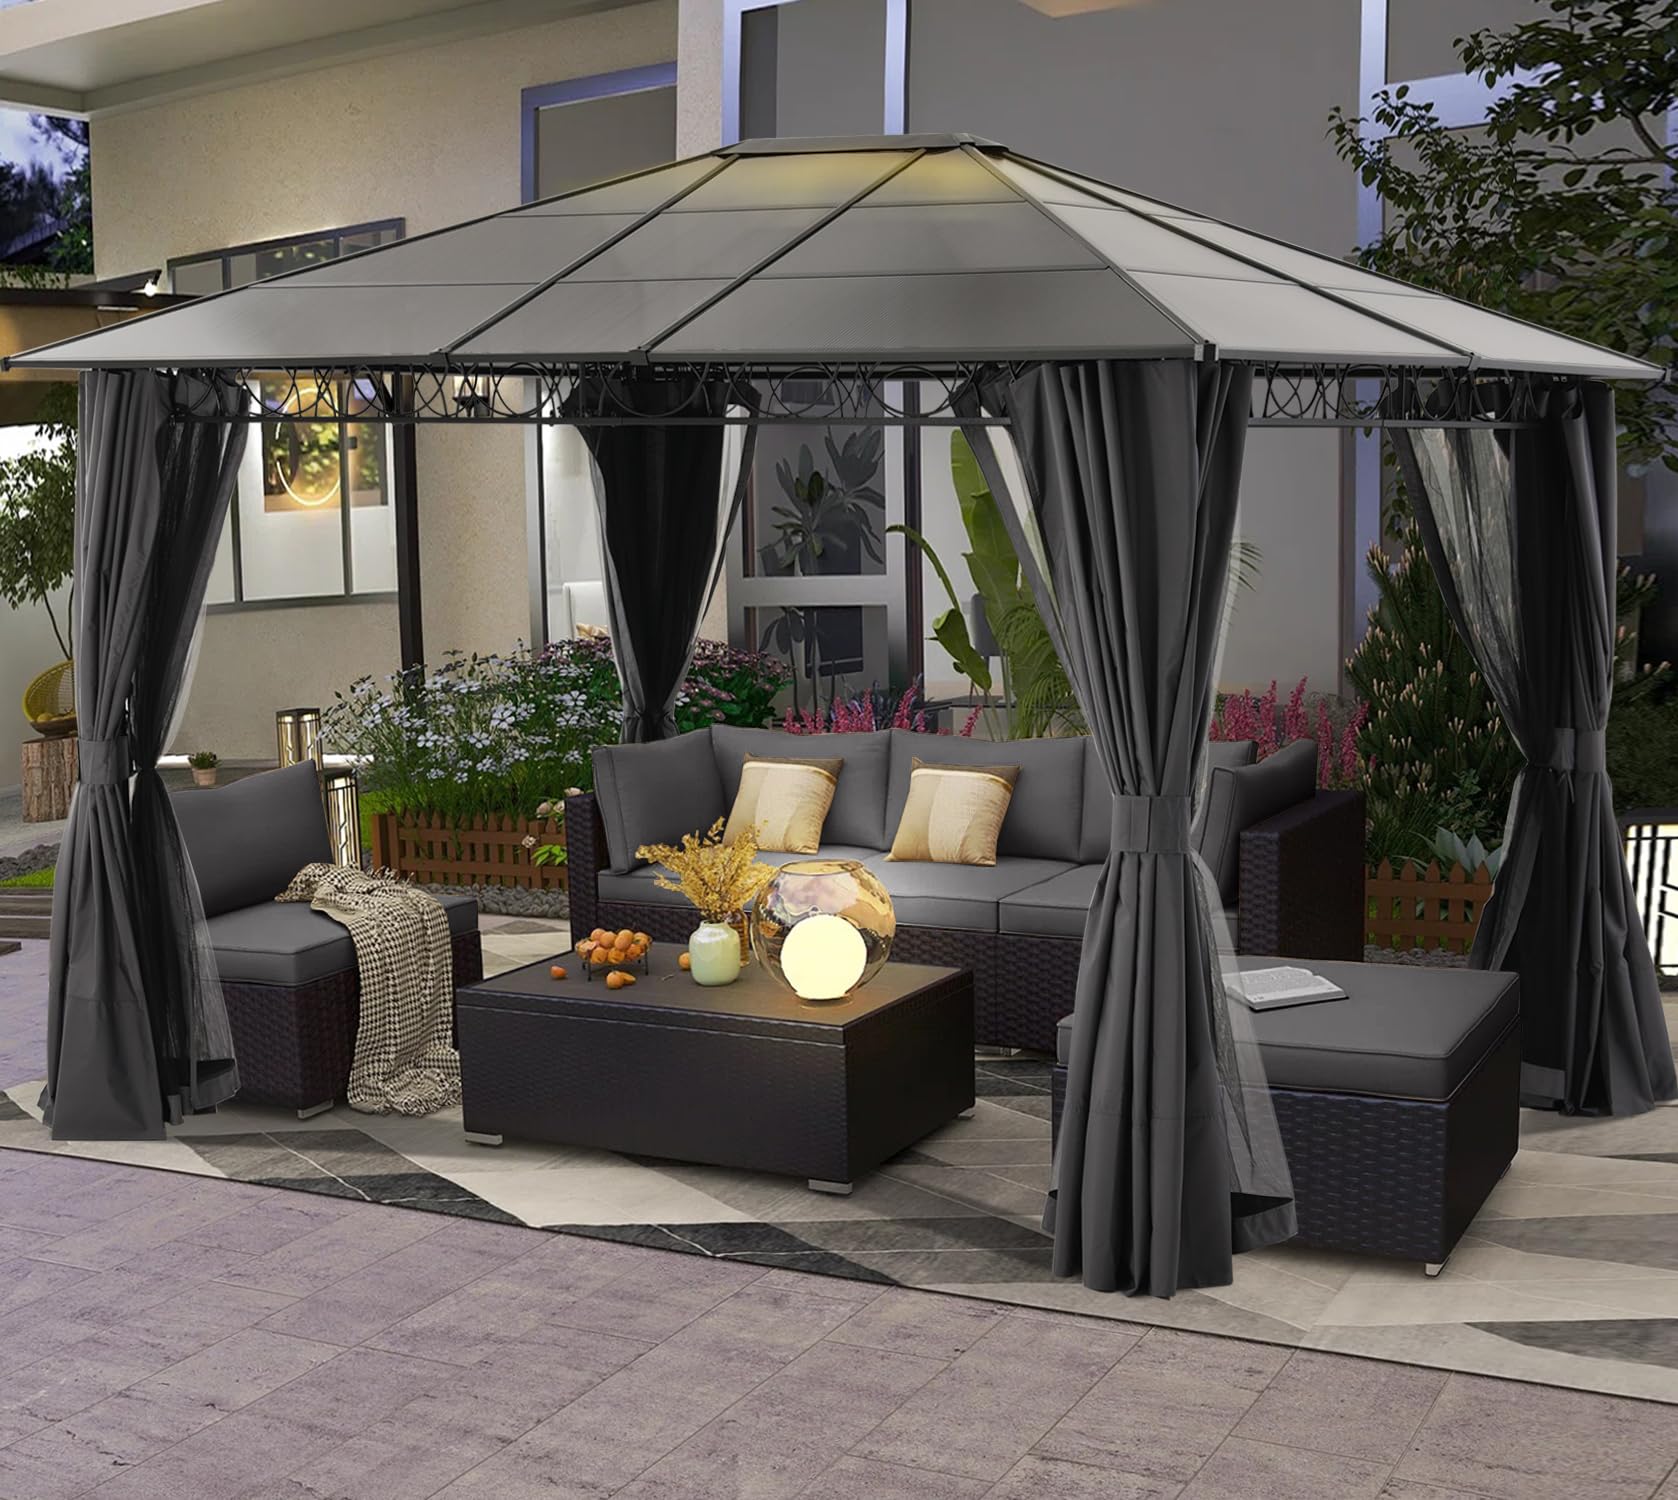 10x12 Hardtop Patio Gazebo with Curtains and Netting by ABCCANOPY